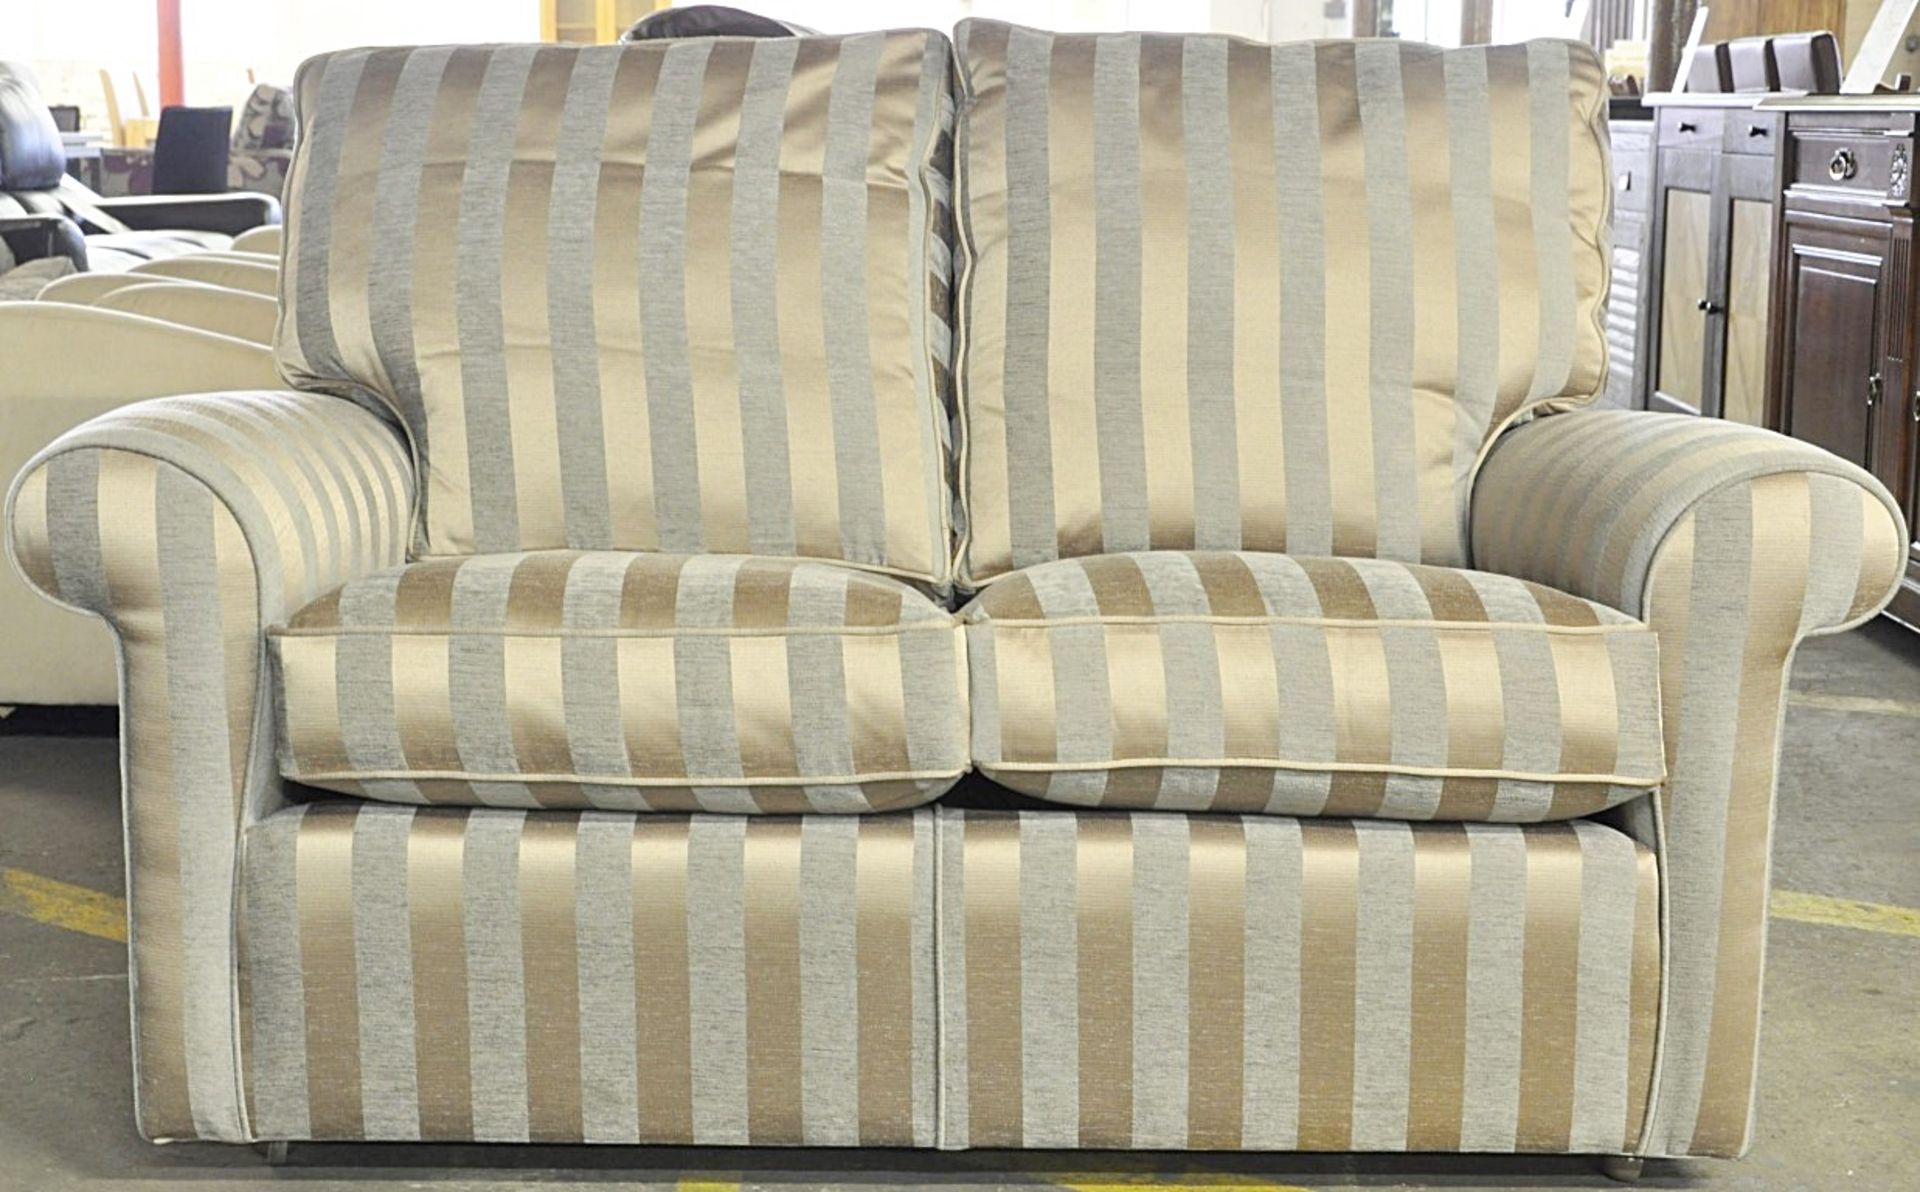 1 x Duresta Luxury 2 Seater Sofa Suite with Matching Chair – Comes in a Two Tone Stripe Pattern – - Image 2 of 3